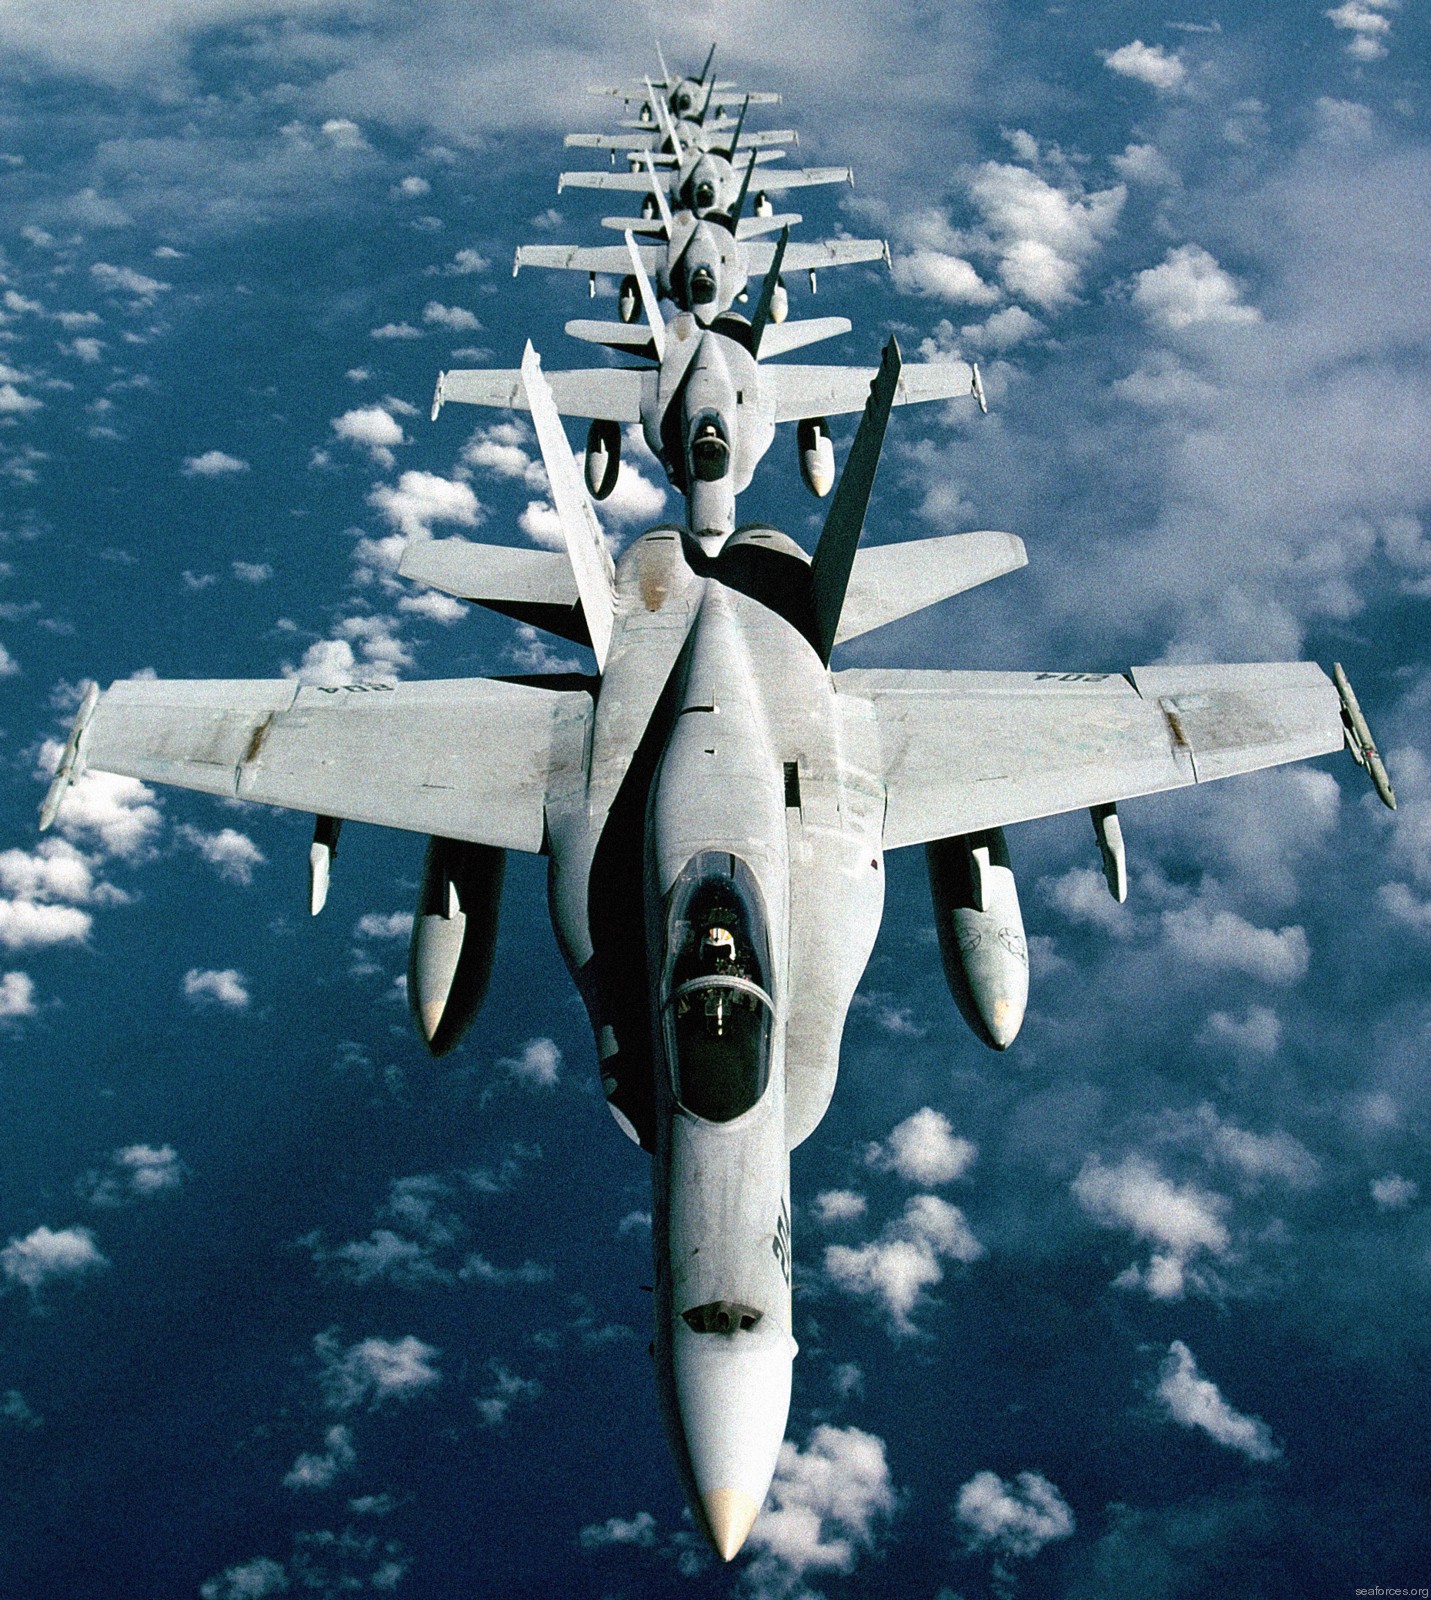 vfa-151 vigilantes strike fighter squadron navy f/a-18c hornet carrier air wing cvw-5 uss midway cv-41 75 formation